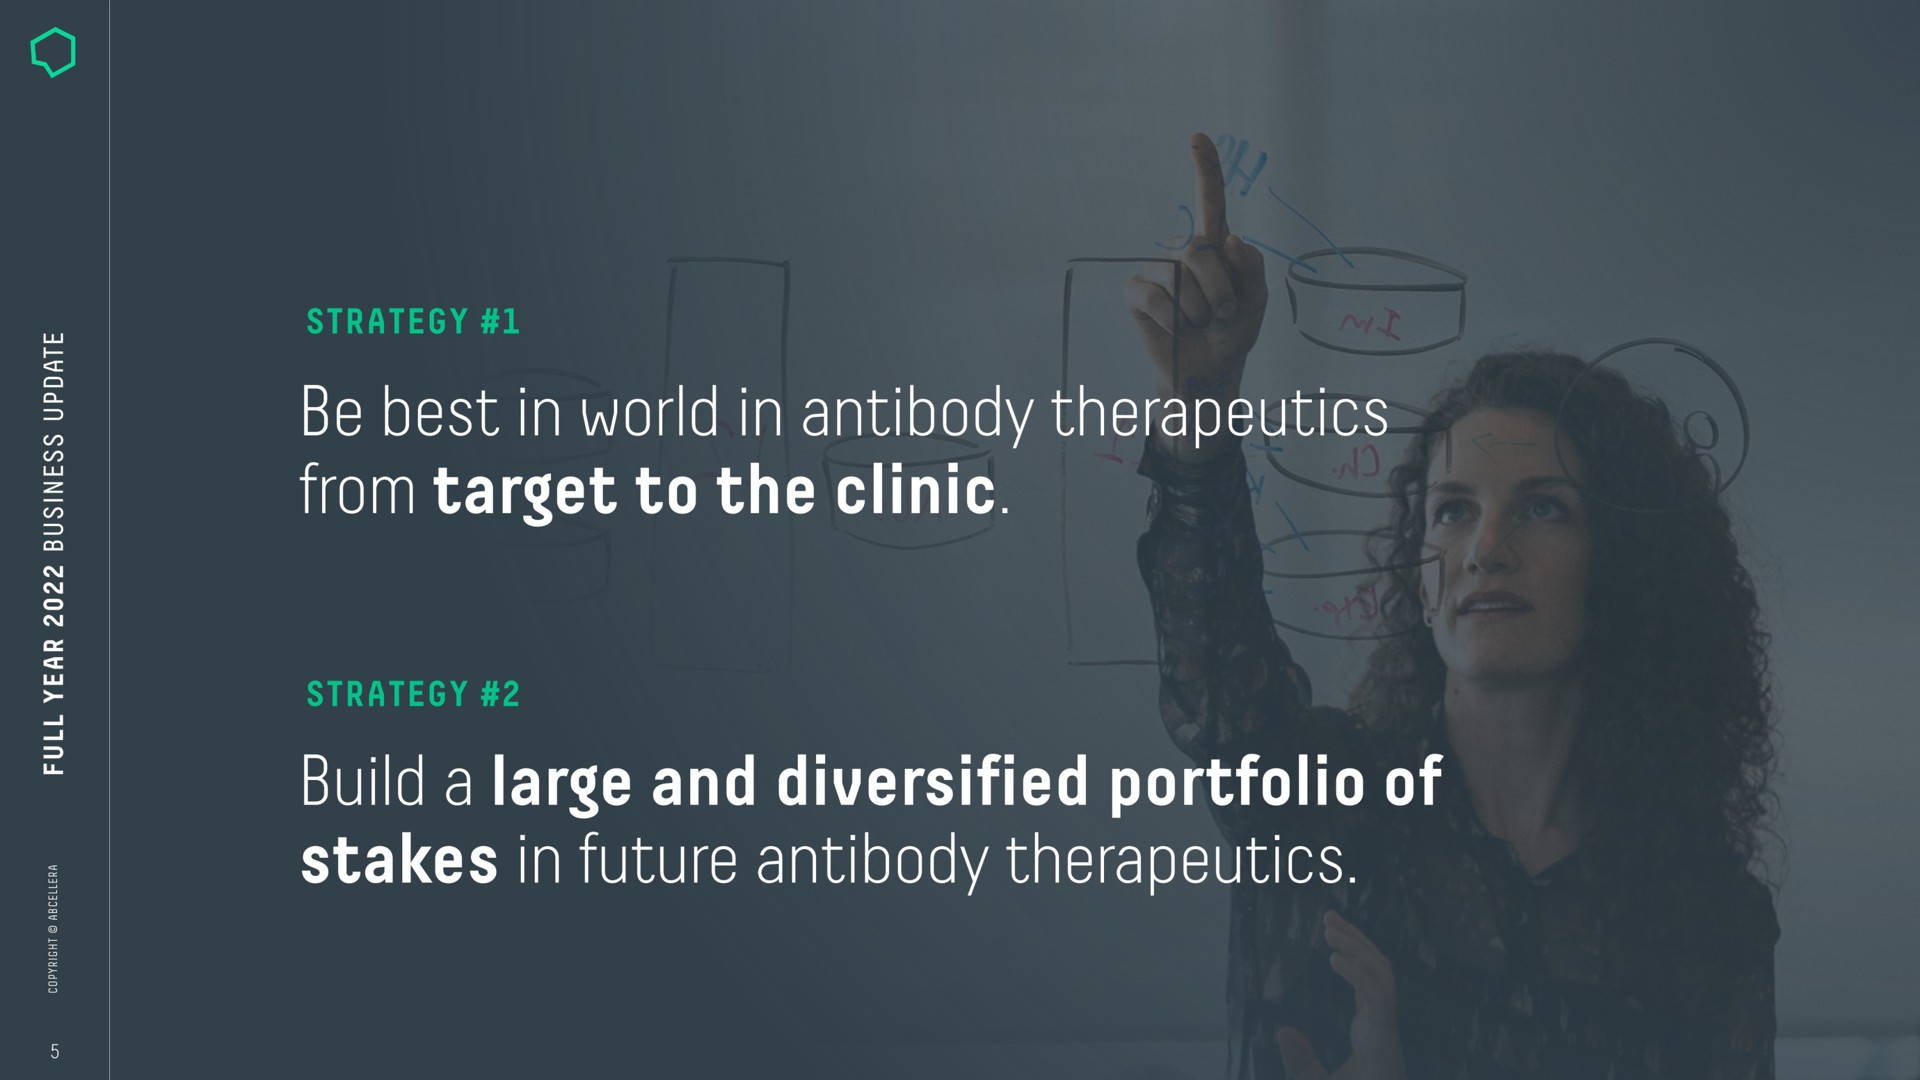 i a a be best in world in antibody therapeutics from target to the clinic build large and diversified portfolio of stakes in future antibody therapeutics | AbCellera